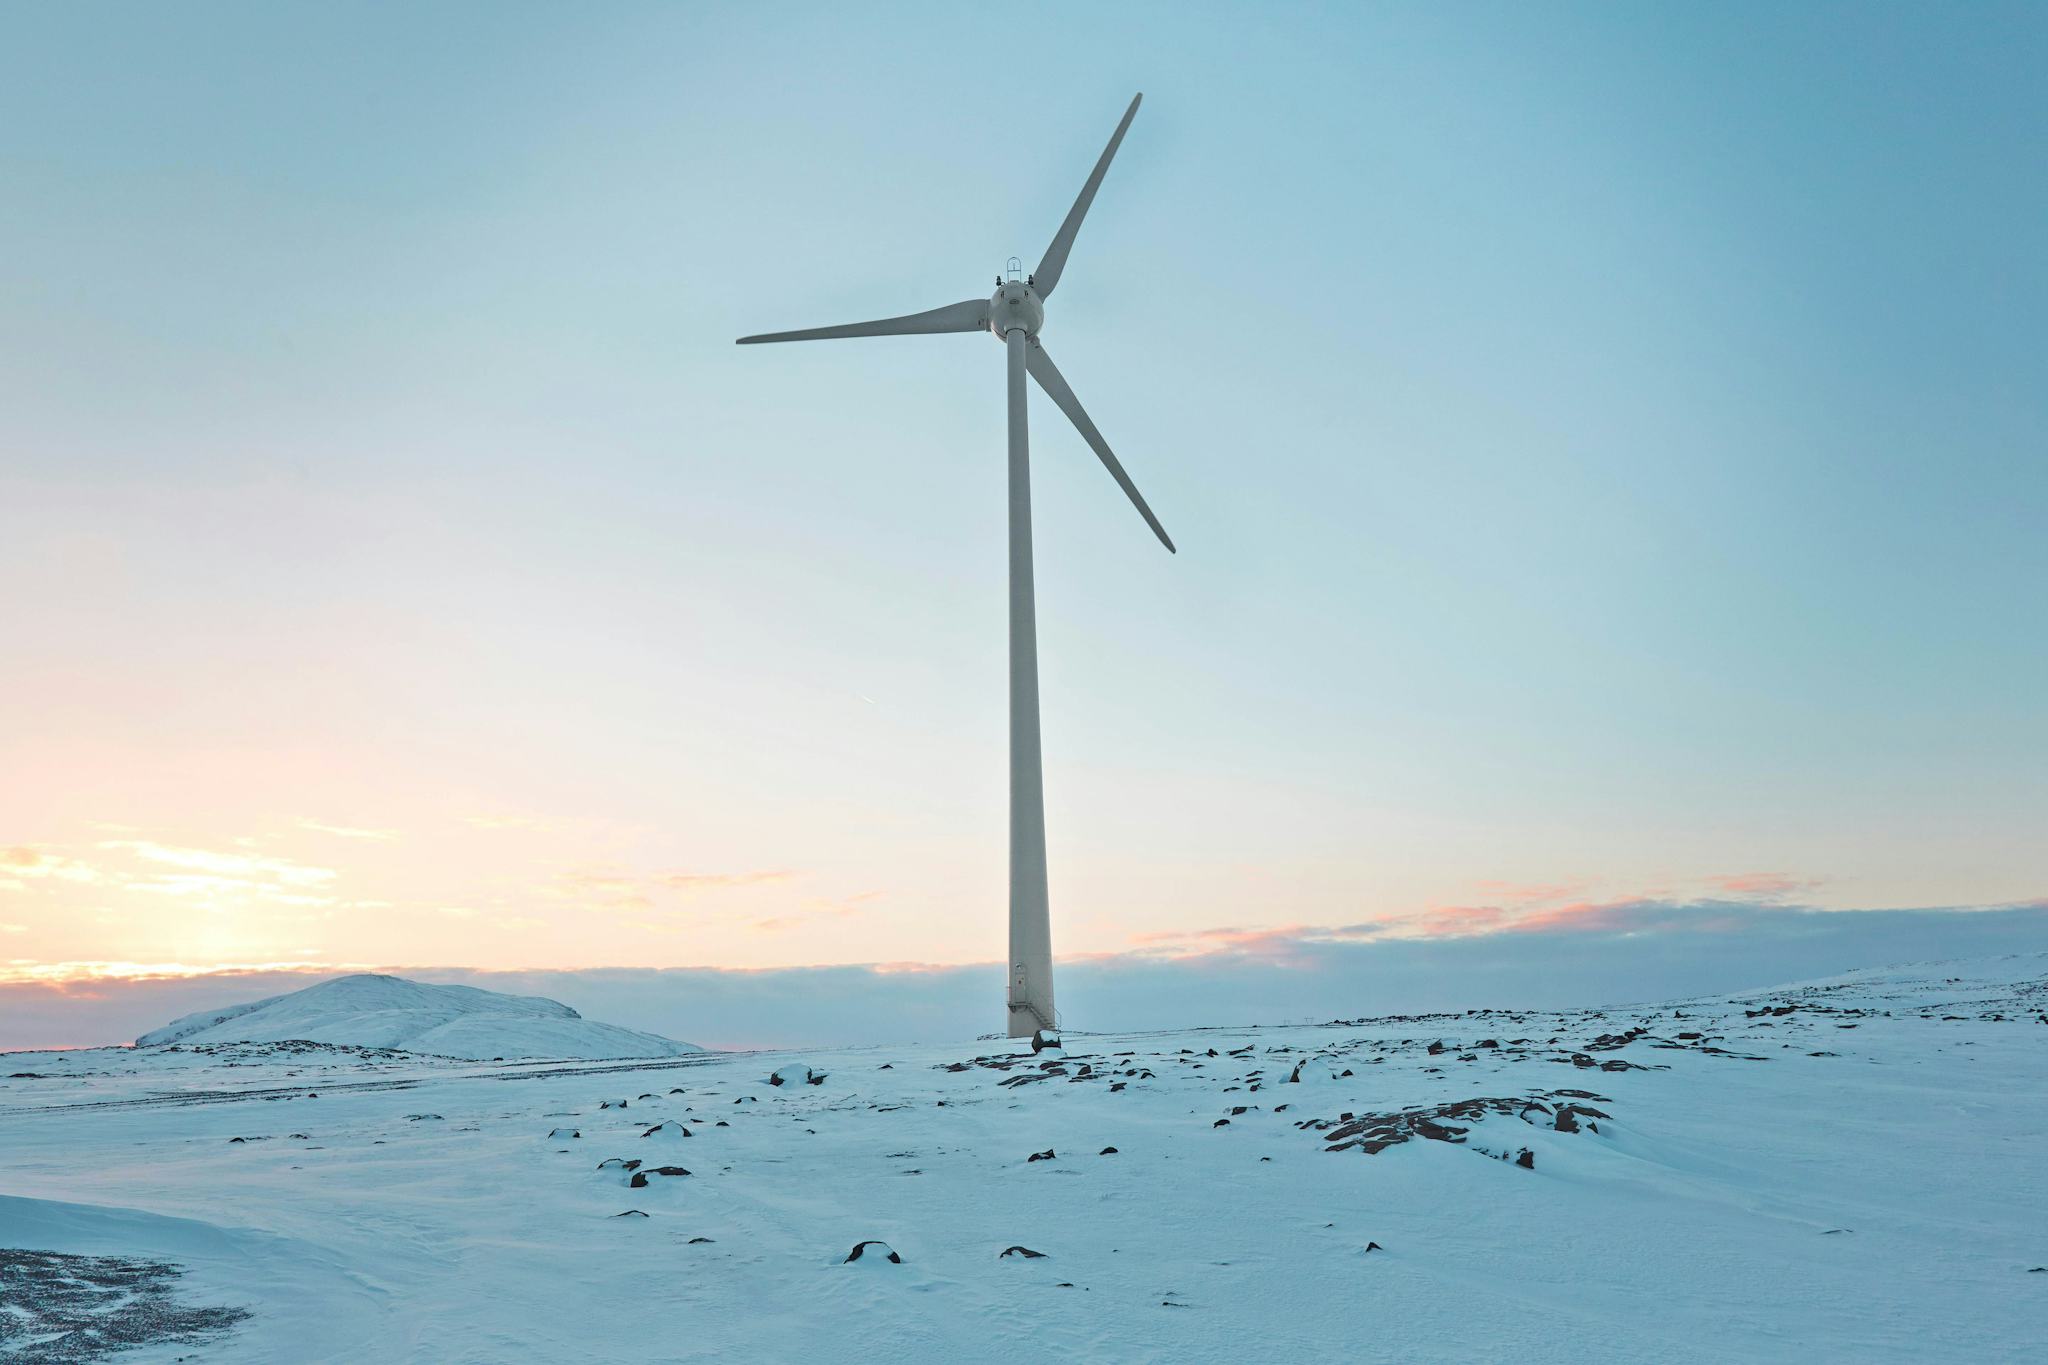 A single wind turbine against a snowy landscape with low sun on the horizon